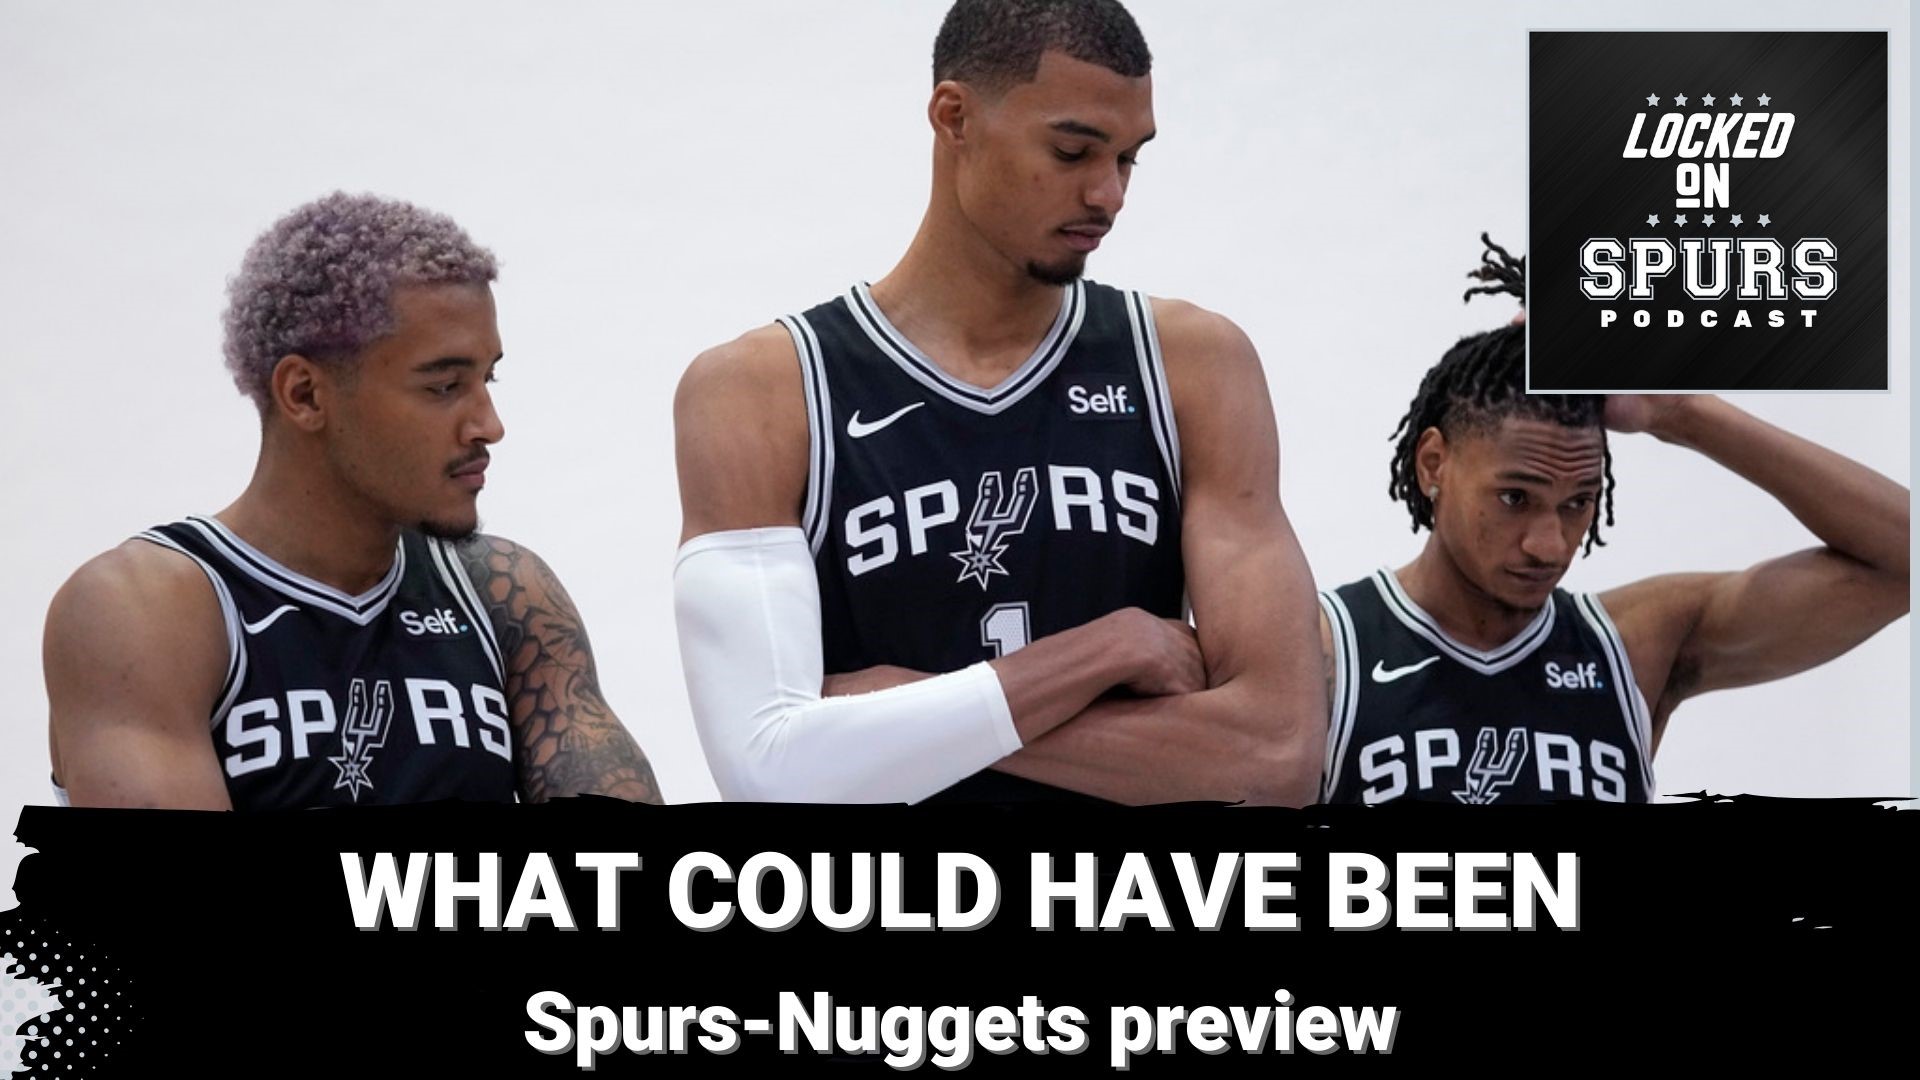 Also, a quick Spurs-Nuggets preview.